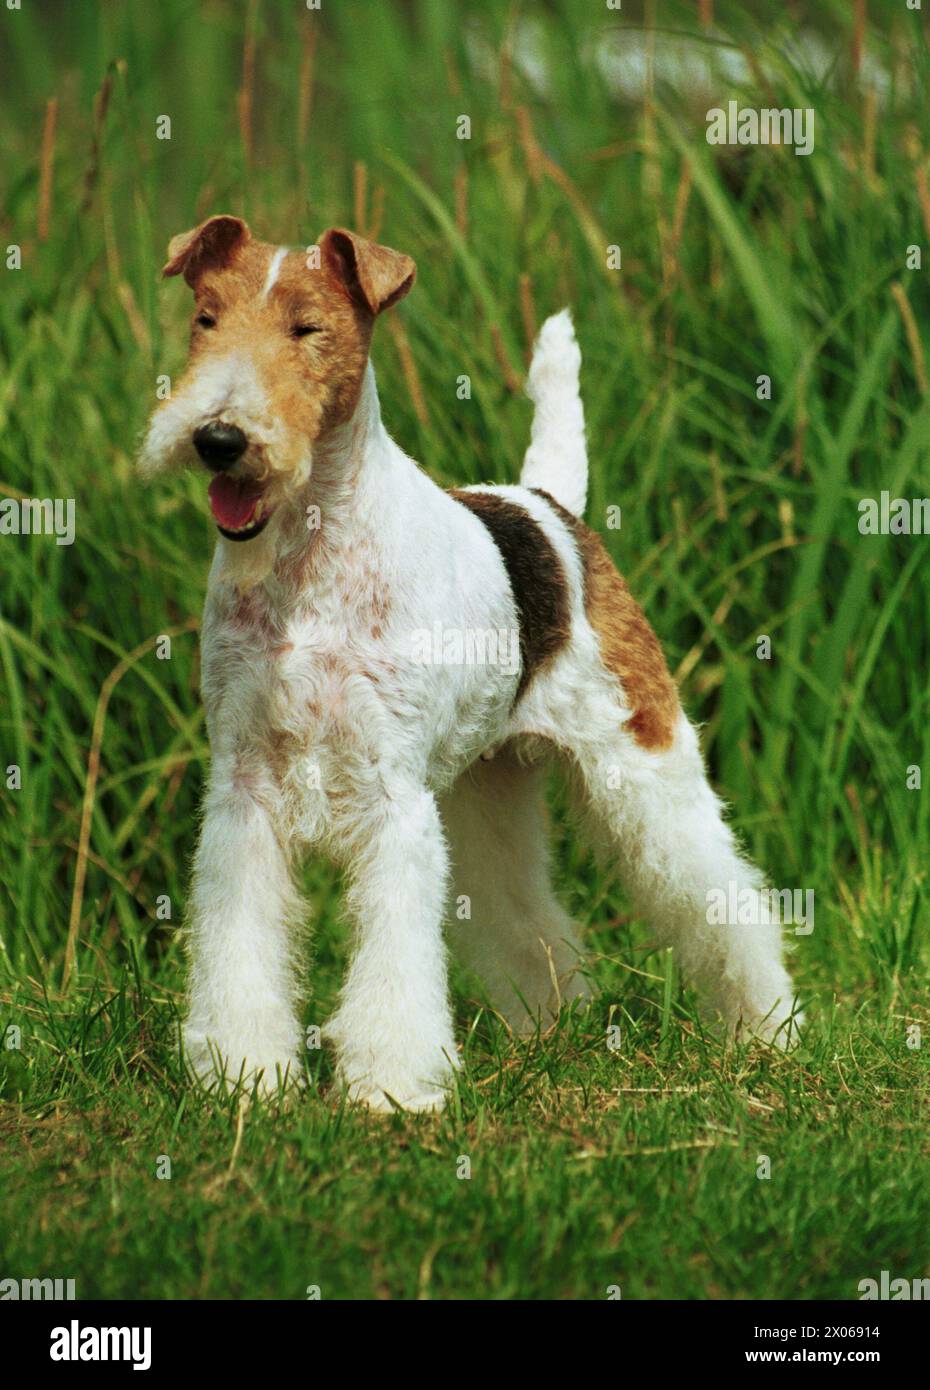 Wire Haired Fox Terrier White with Black and Tan Facing Forwards Stock Photo